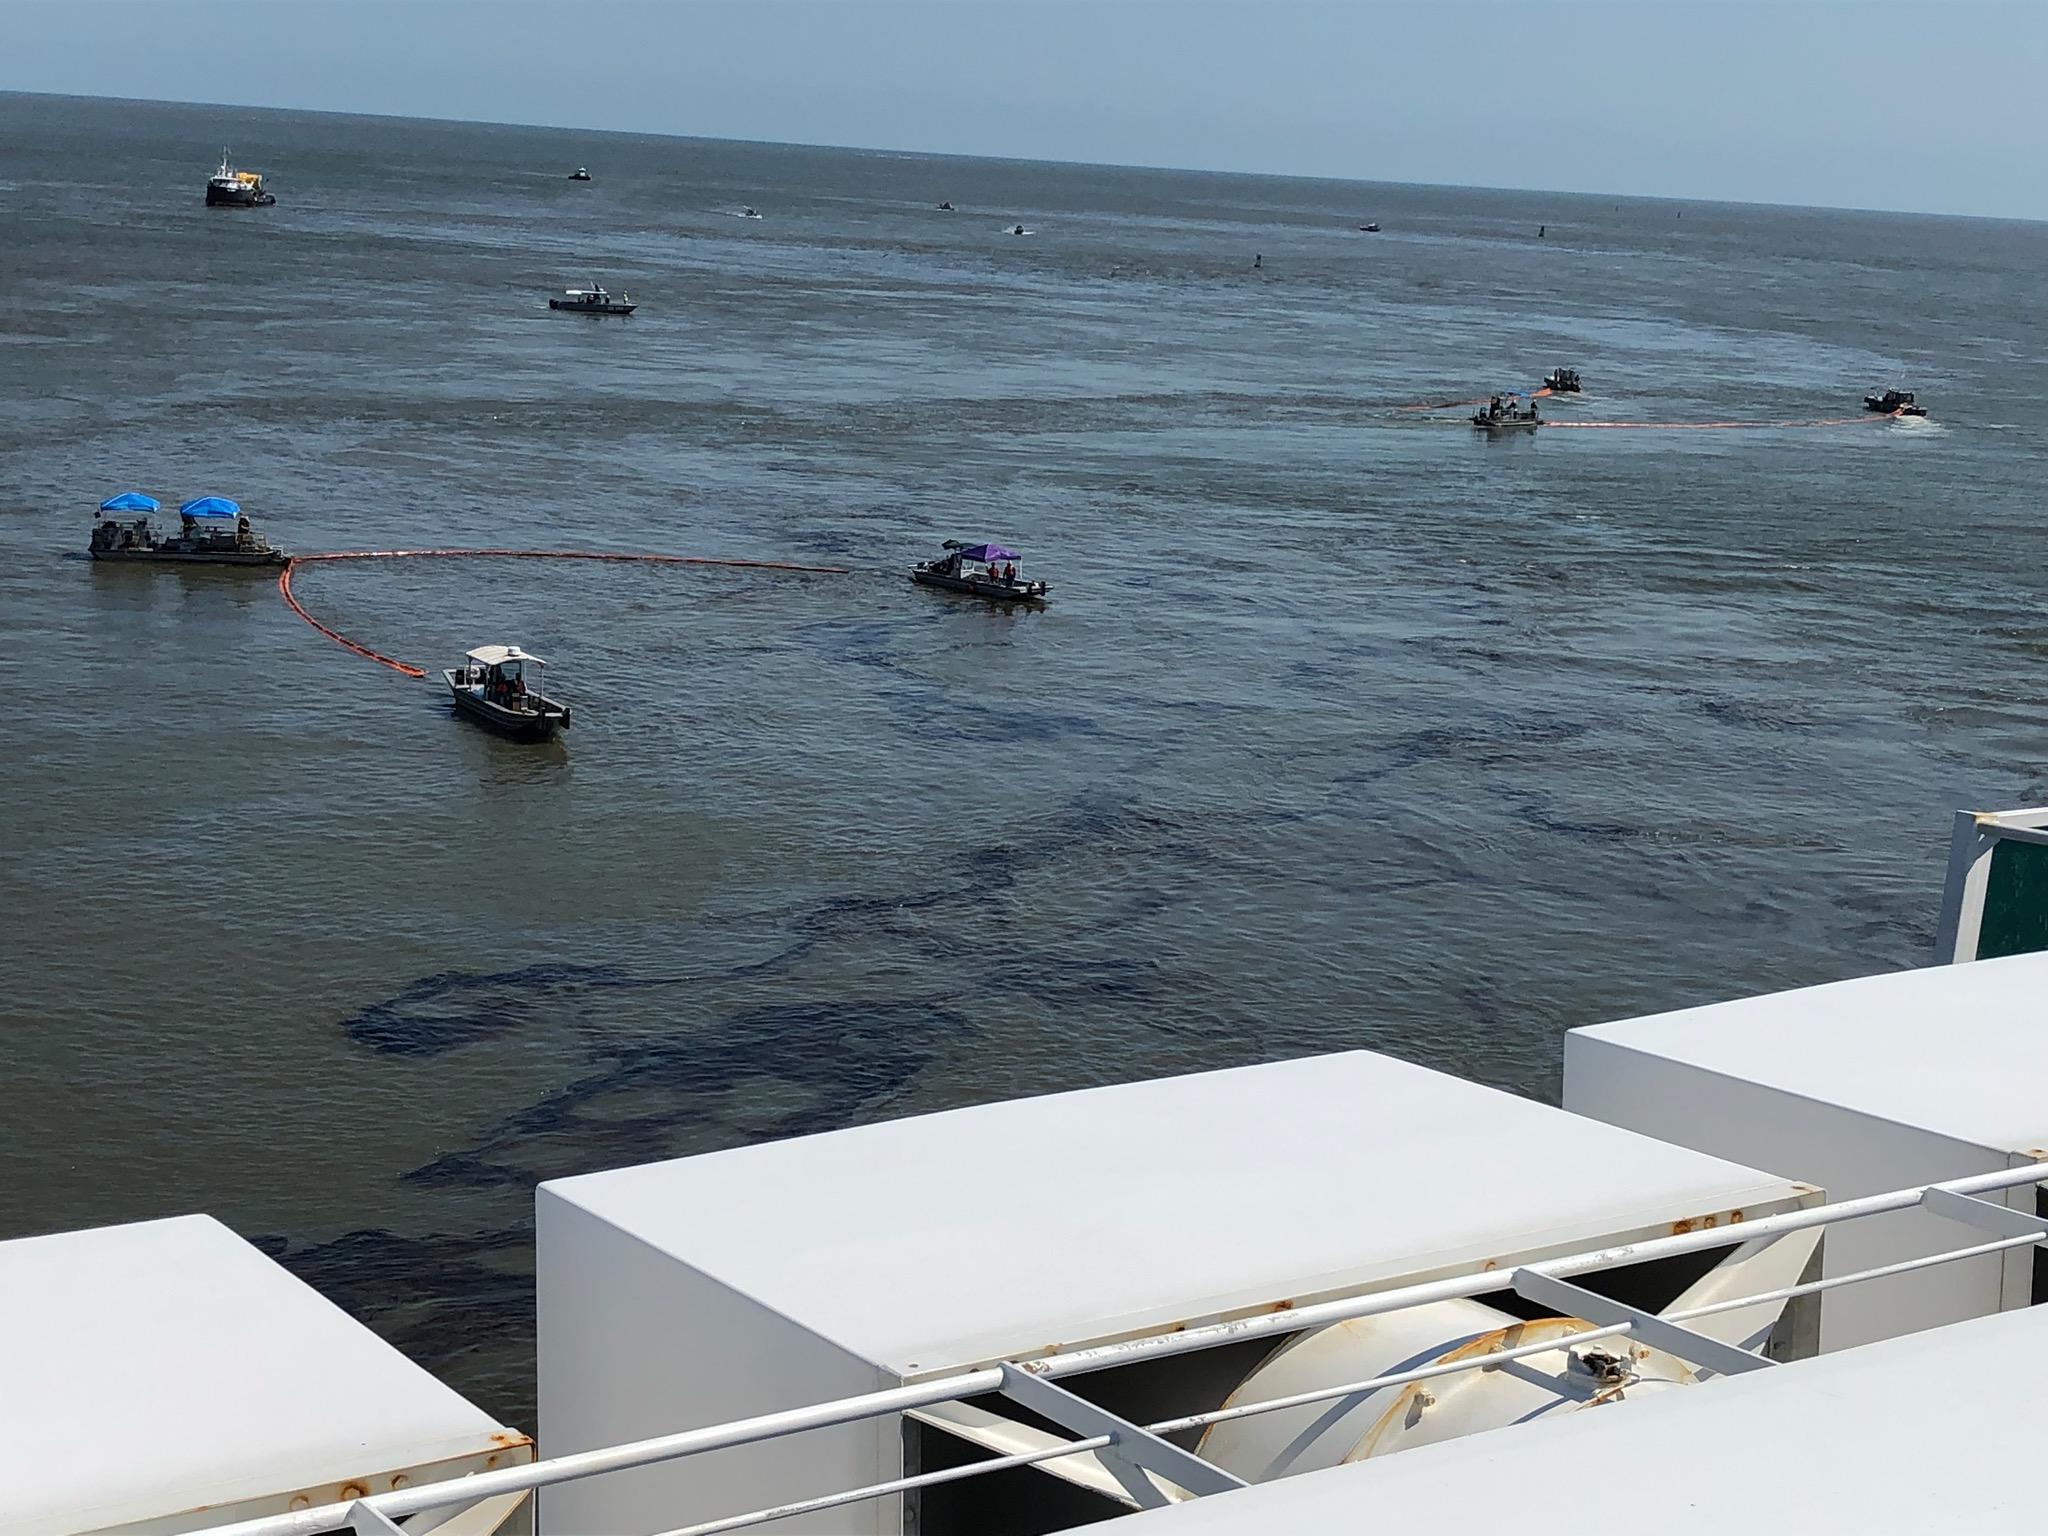 Several vessels drag a skimming boom across the water's surface where a patch of oil is visible.